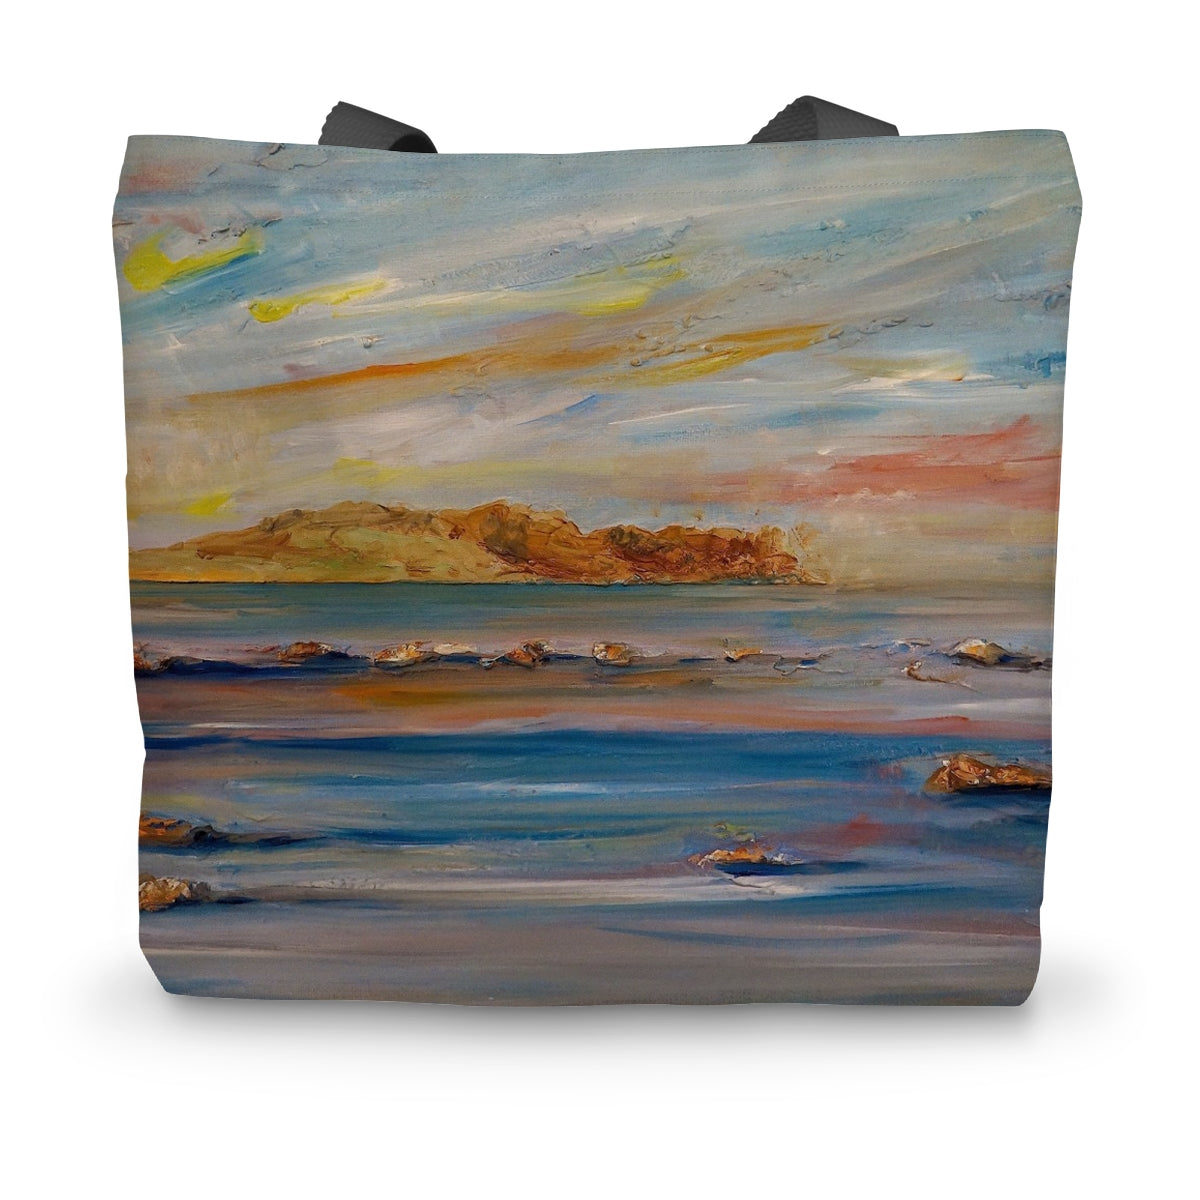 Tiree Dawn Art Gifts Canvas Tote Bag-Bags-Hebridean Islands Art Gallery-14"x18.5"-Paintings, Prints, Homeware, Art Gifts From Scotland By Scottish Artist Kevin Hunter